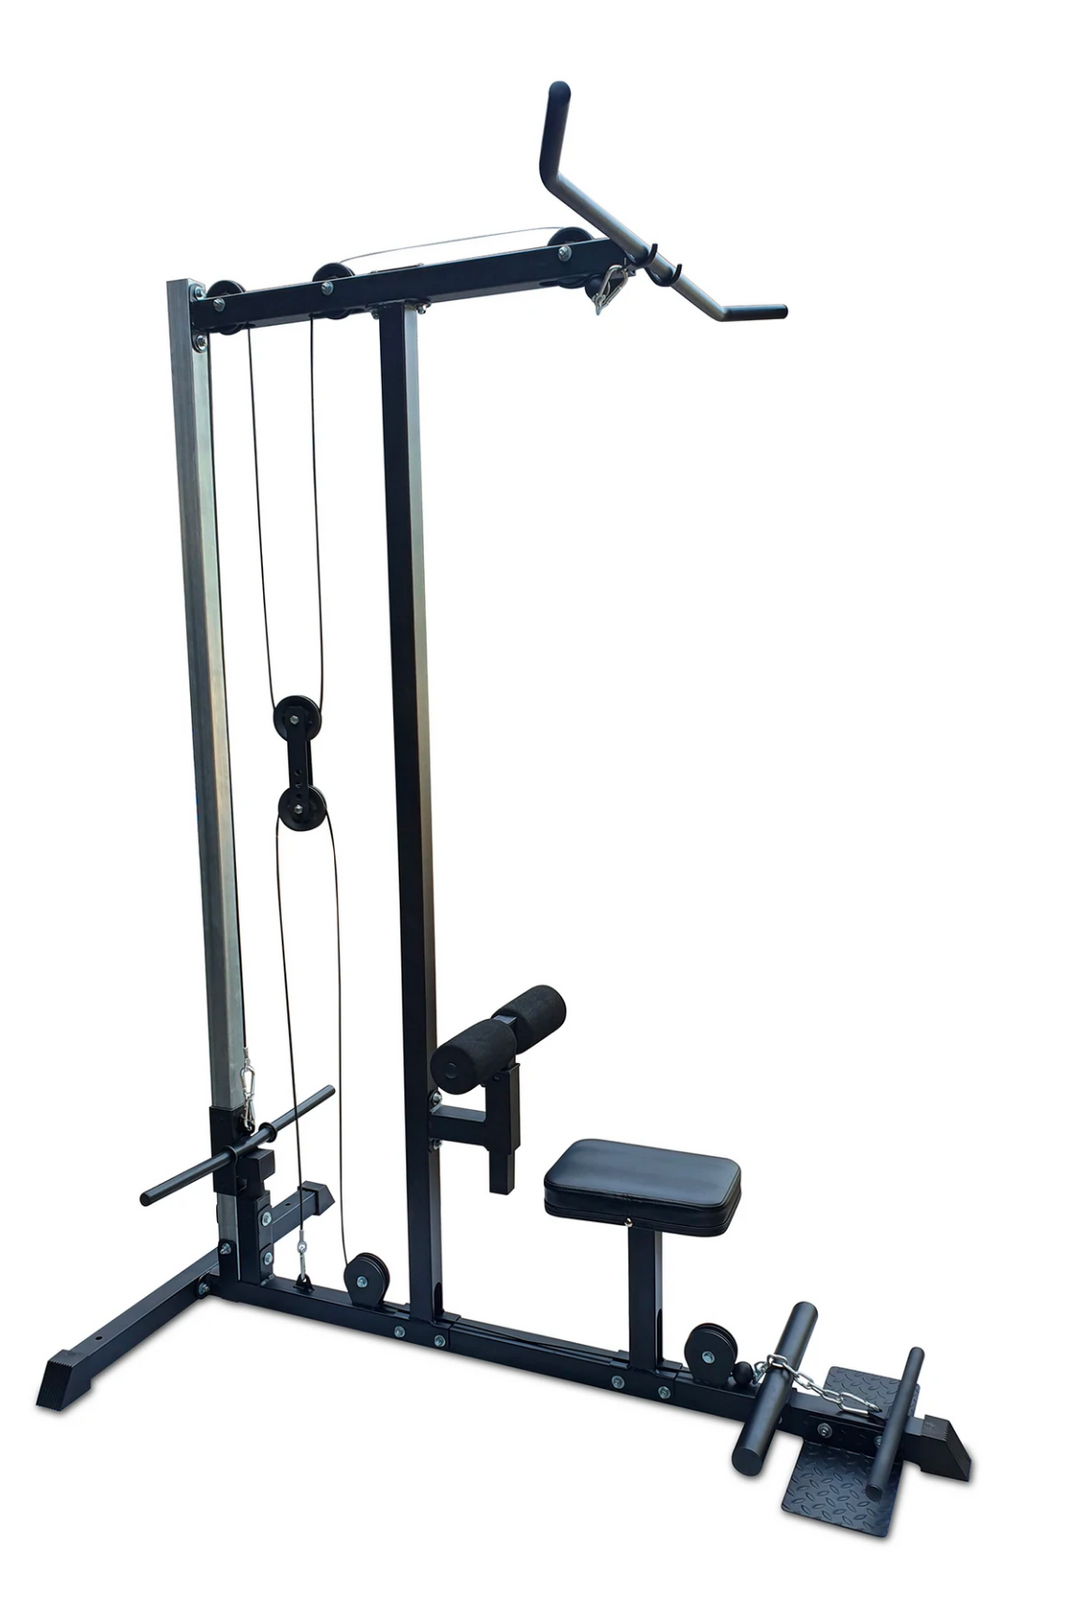 Lat pull down and low row gym machine